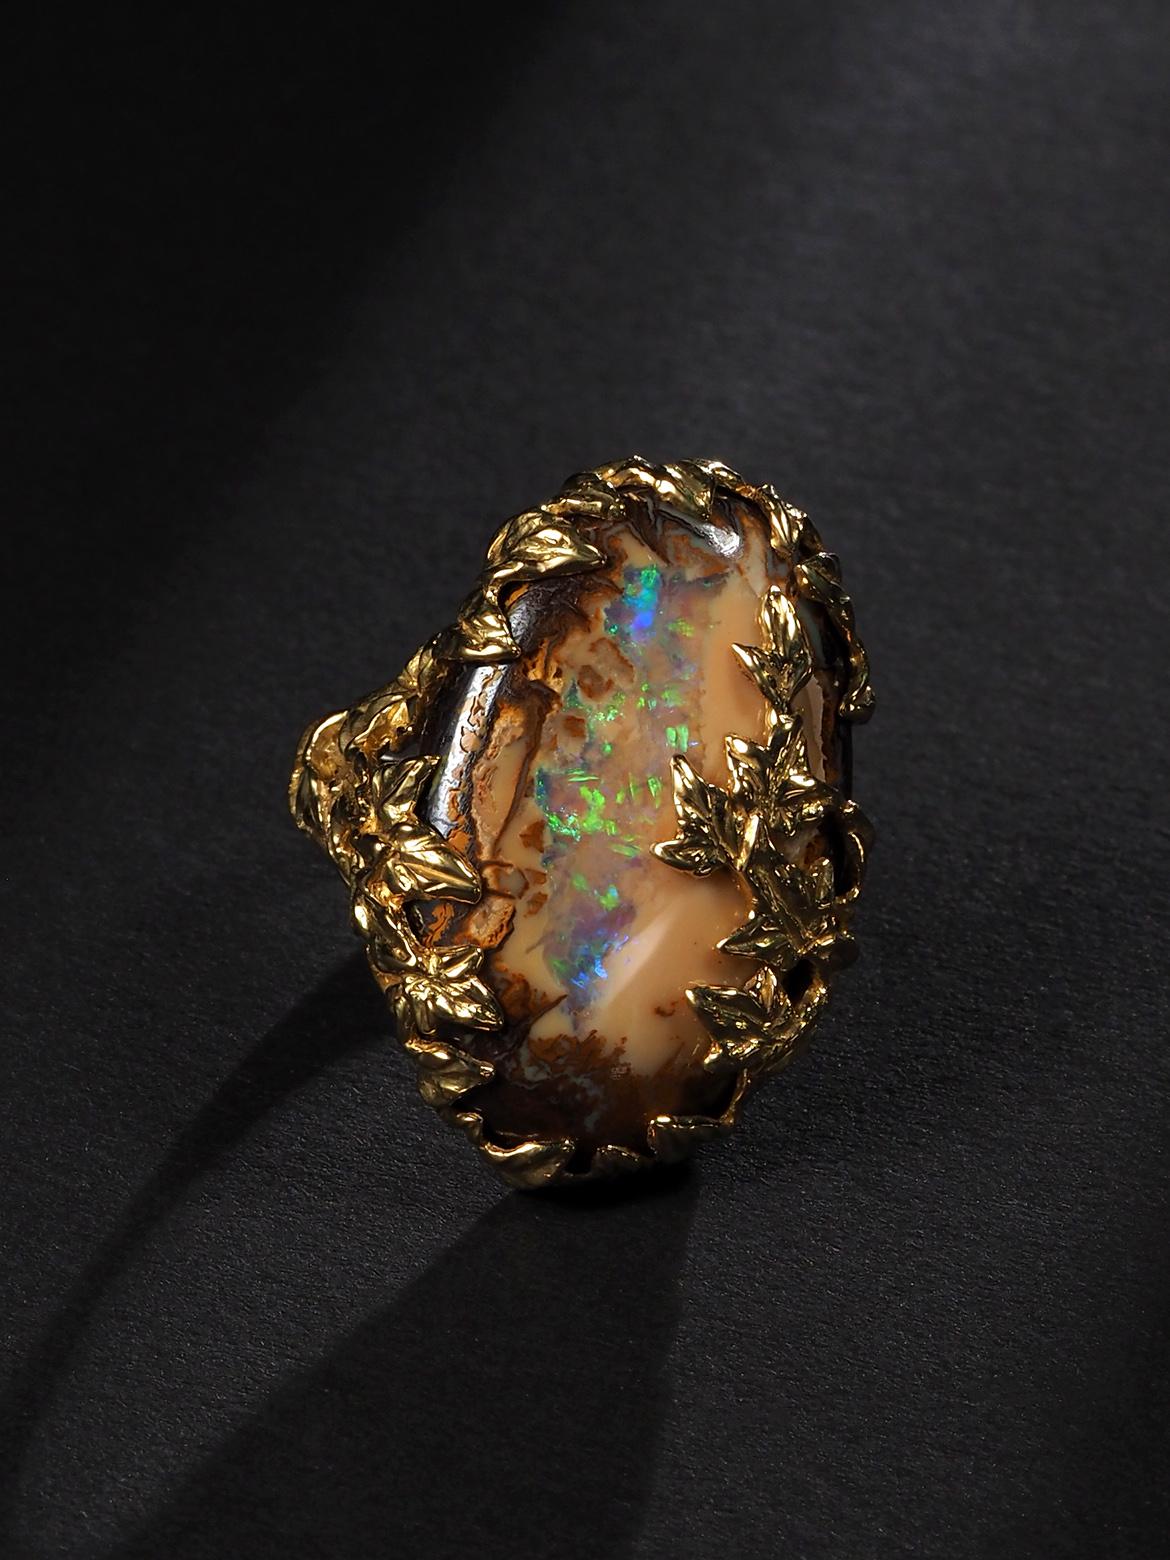 Ivy ring with Boulder Opal in 18K yellow gold
opal origin - Australia
opal measurements - 0.71 х 1.06 in / 18 х 27 mm
gemstone weight - 14.95 carats
ring size - 8.5 US - 58 EU
ring weight - 14.7 grams

Ivy collection


We ship our jewelry worldwide